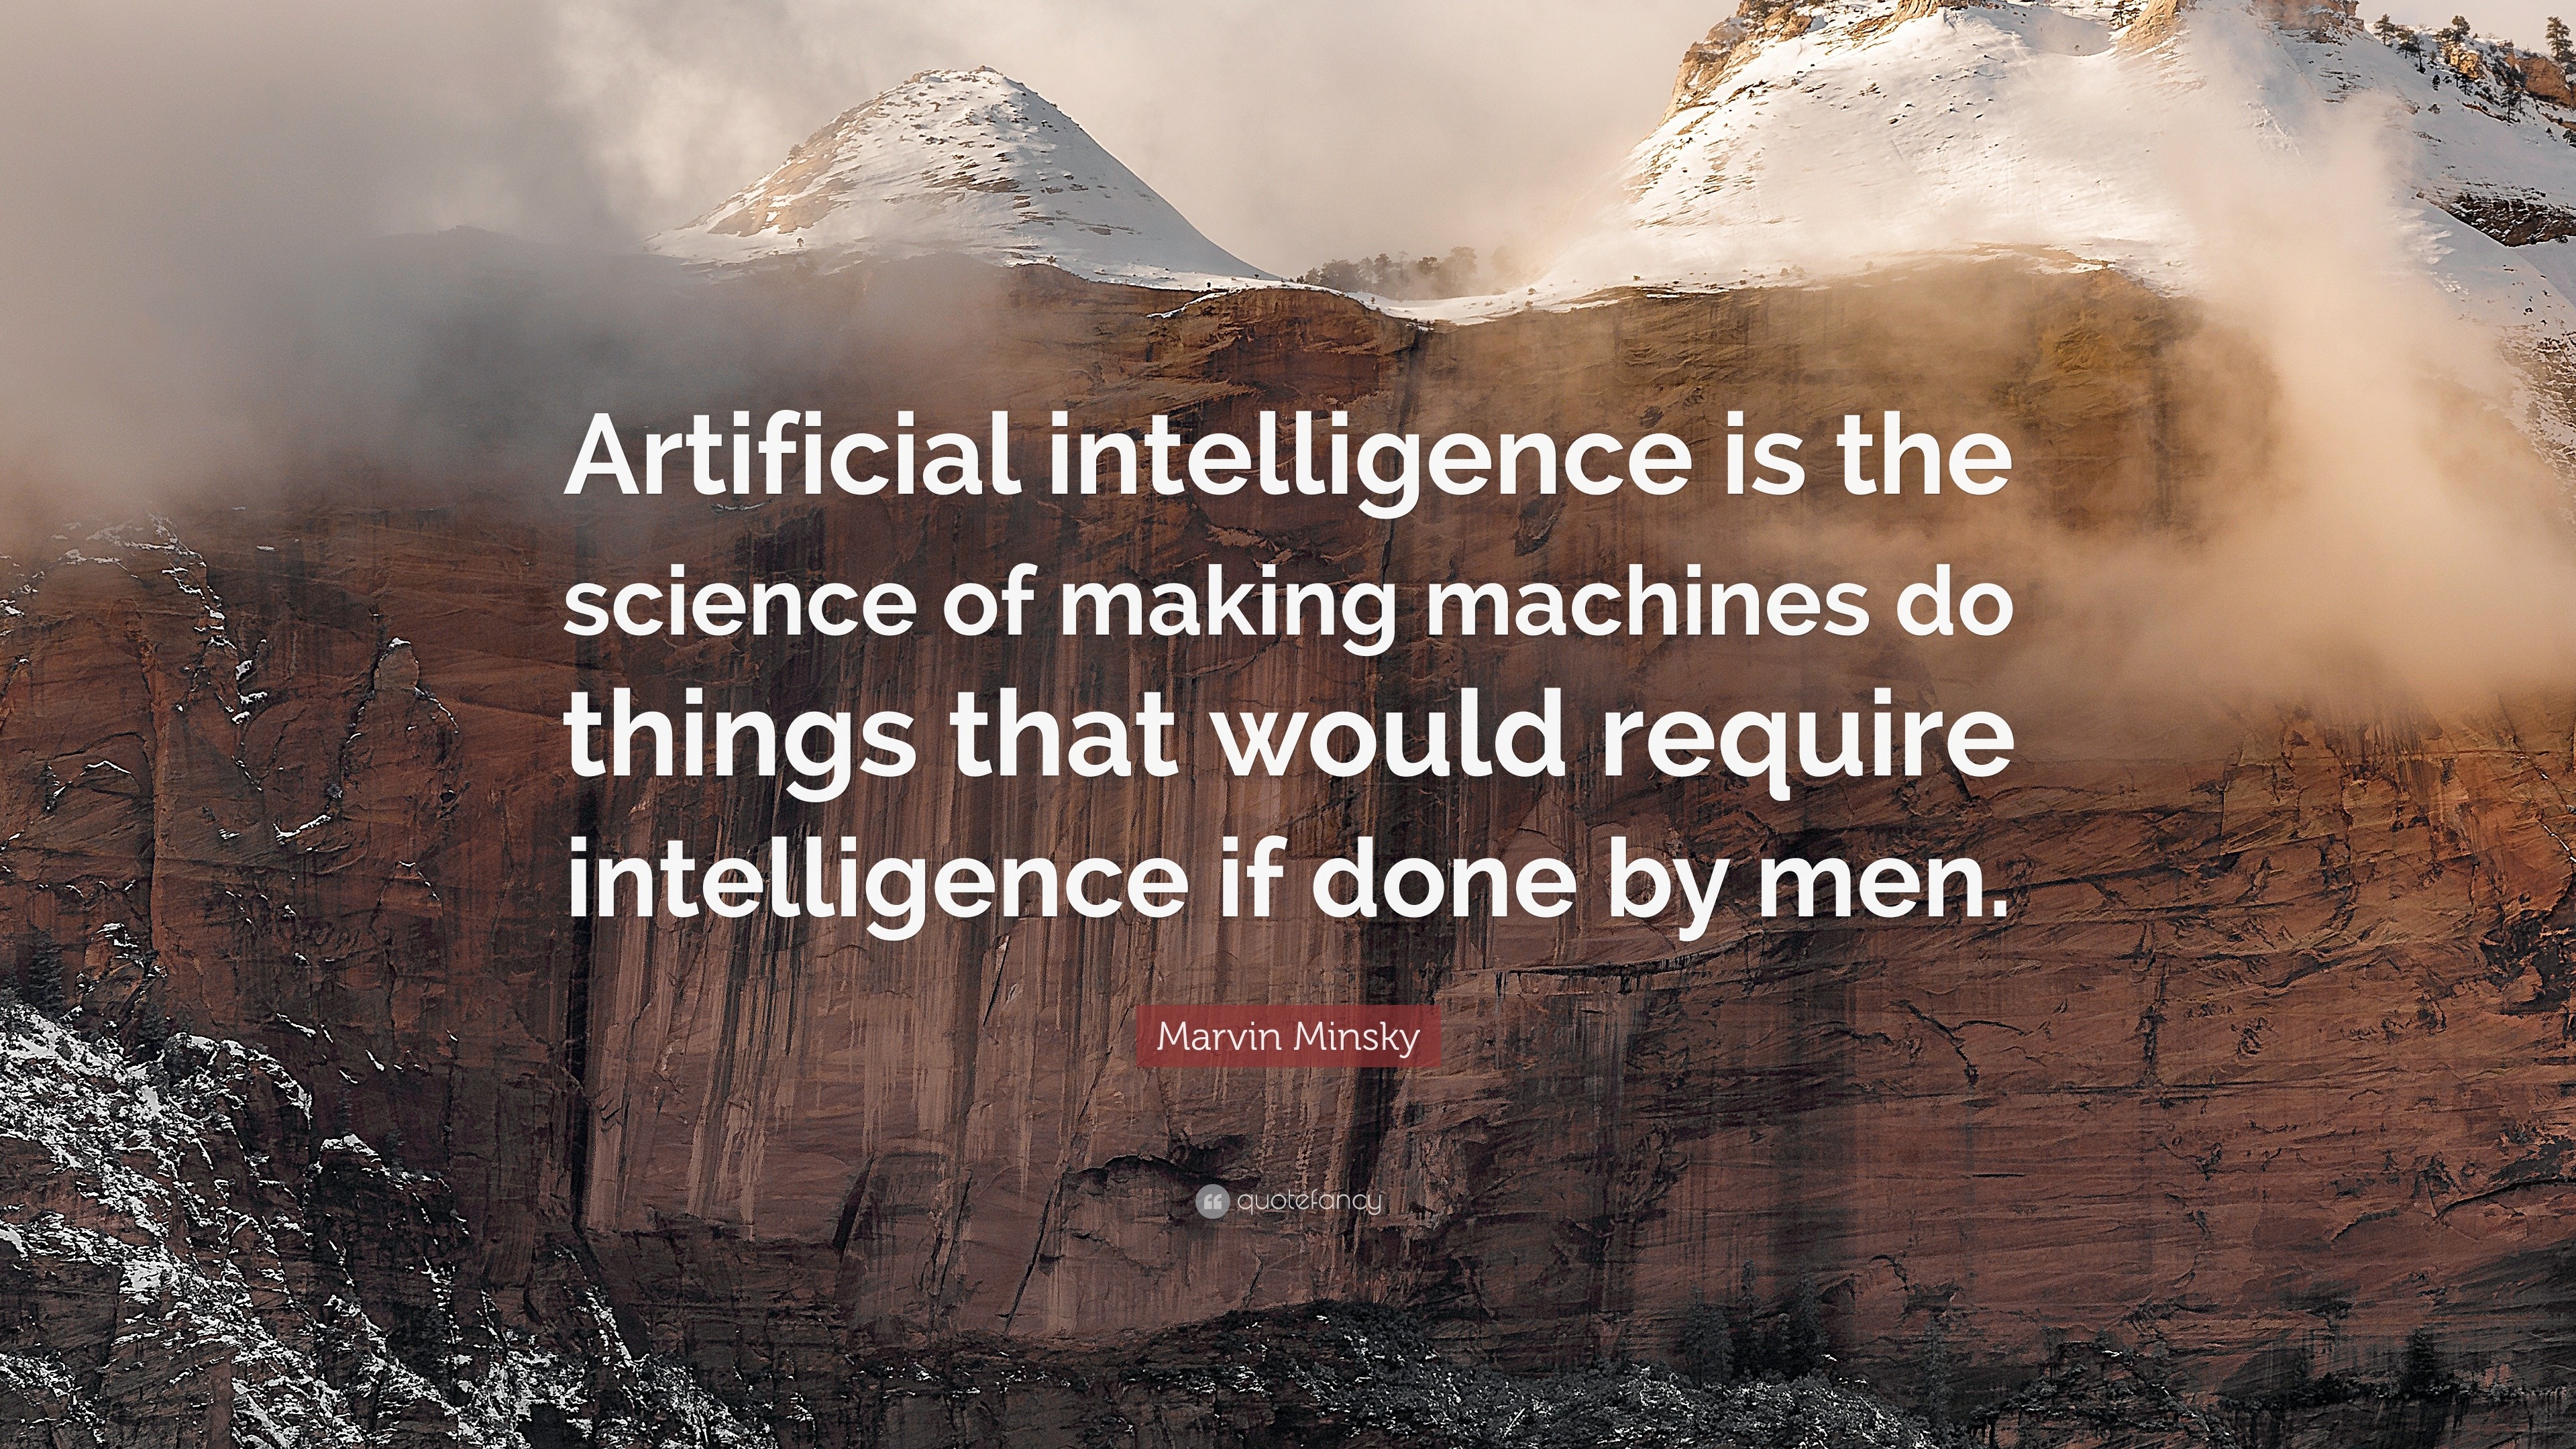 Artificial Intelligence Quotes - 15 Eye-opener Quotes on Artificial